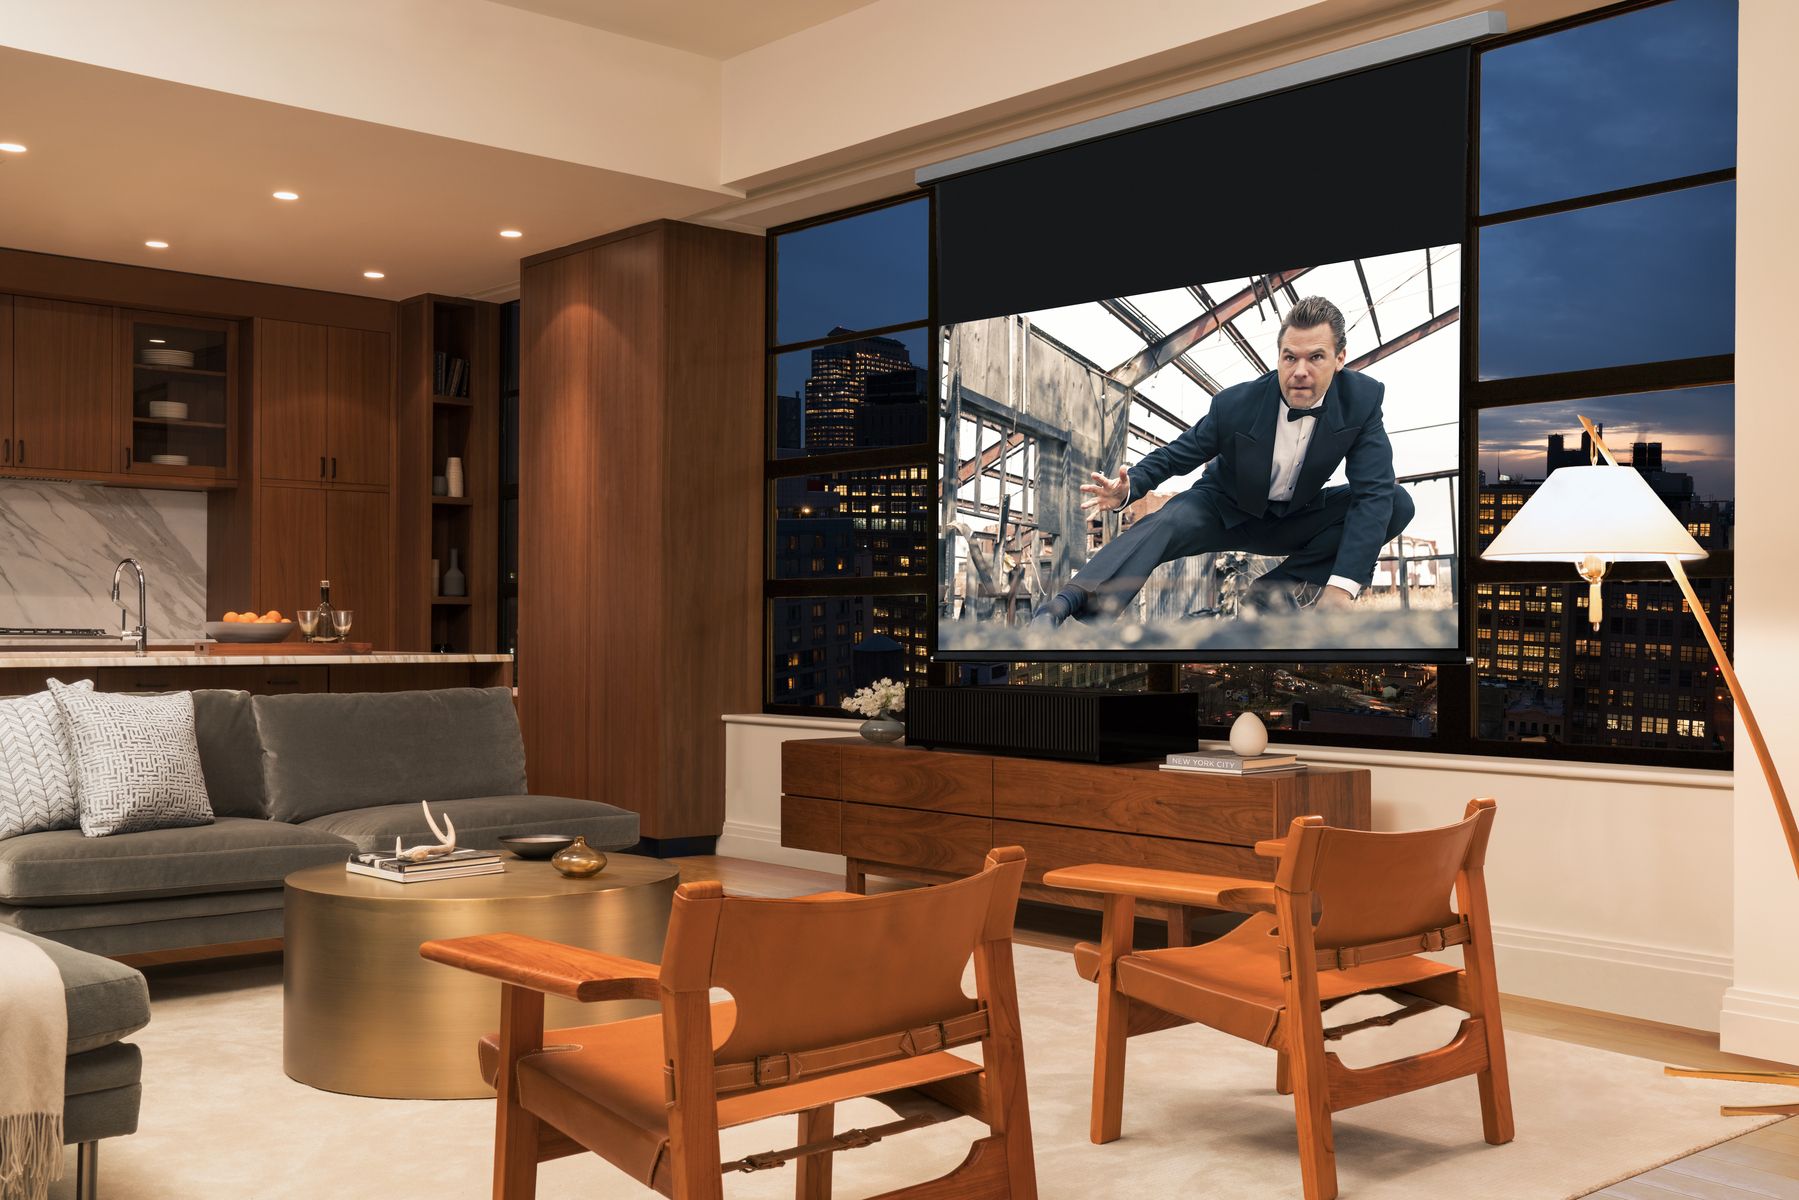 Sony pull-down projector in a room with wooden accents